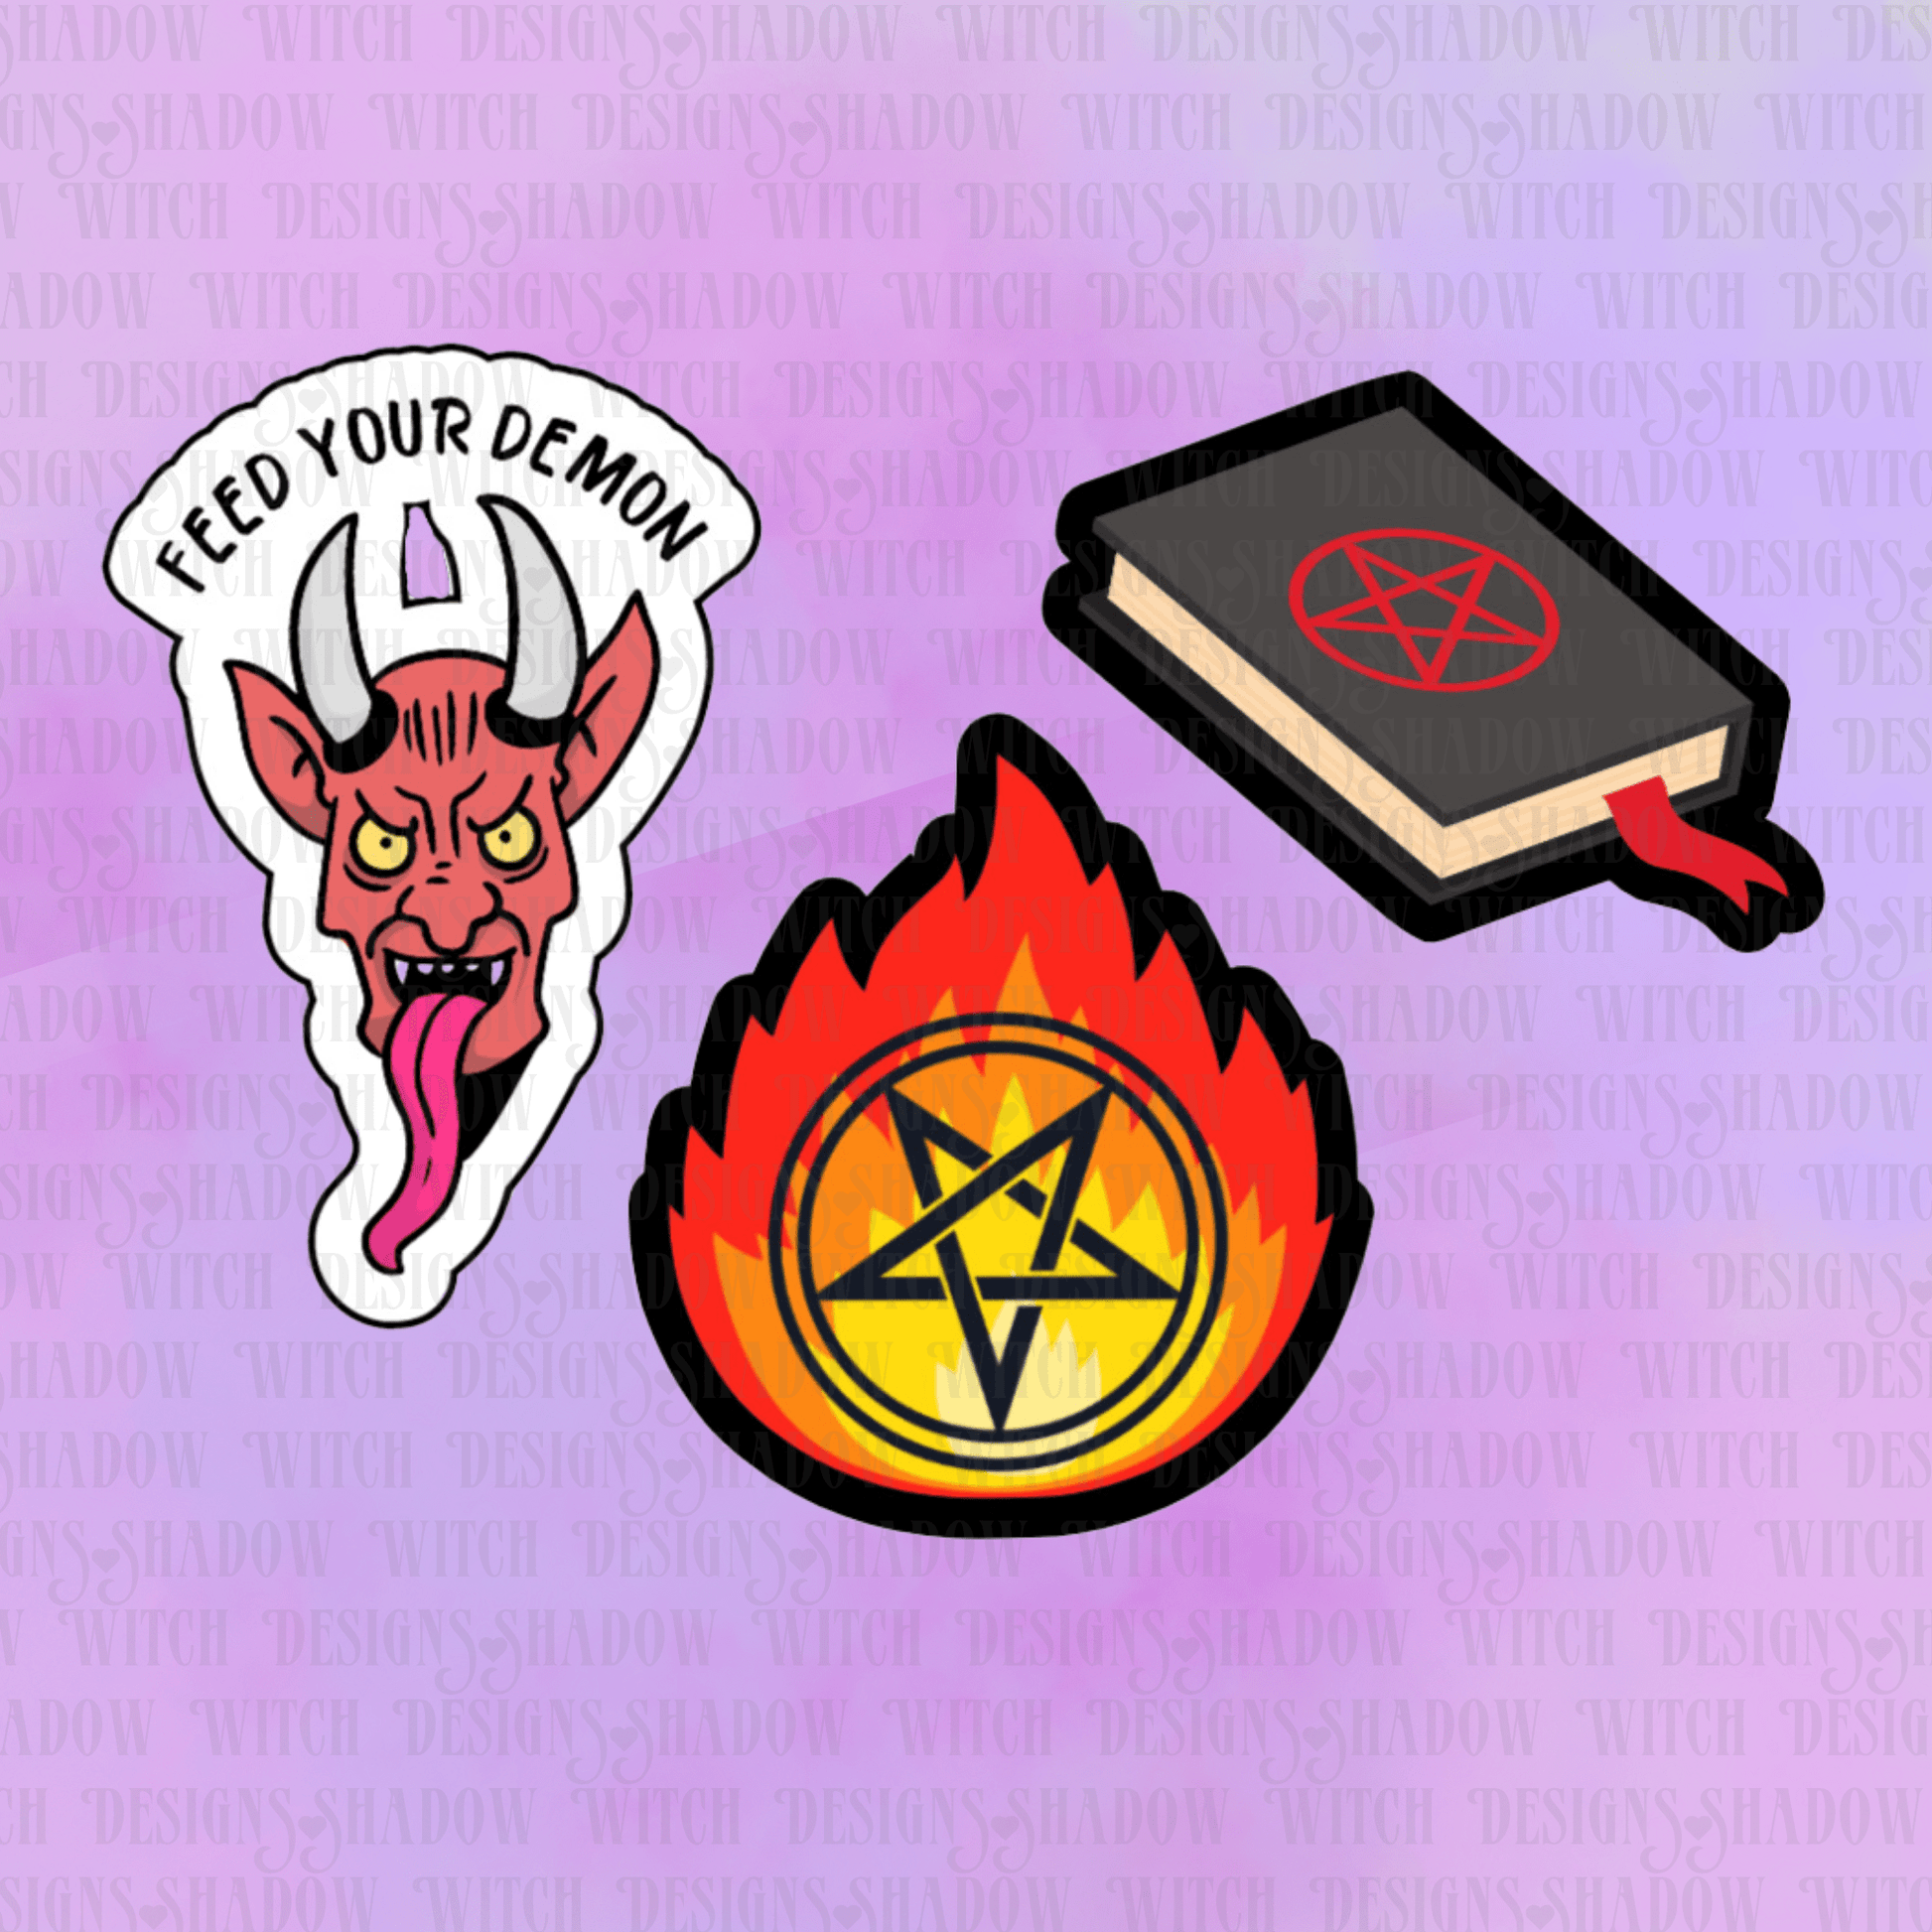 Shadow Witch Designs Feed Your Demon Sticker Pack FYDSP